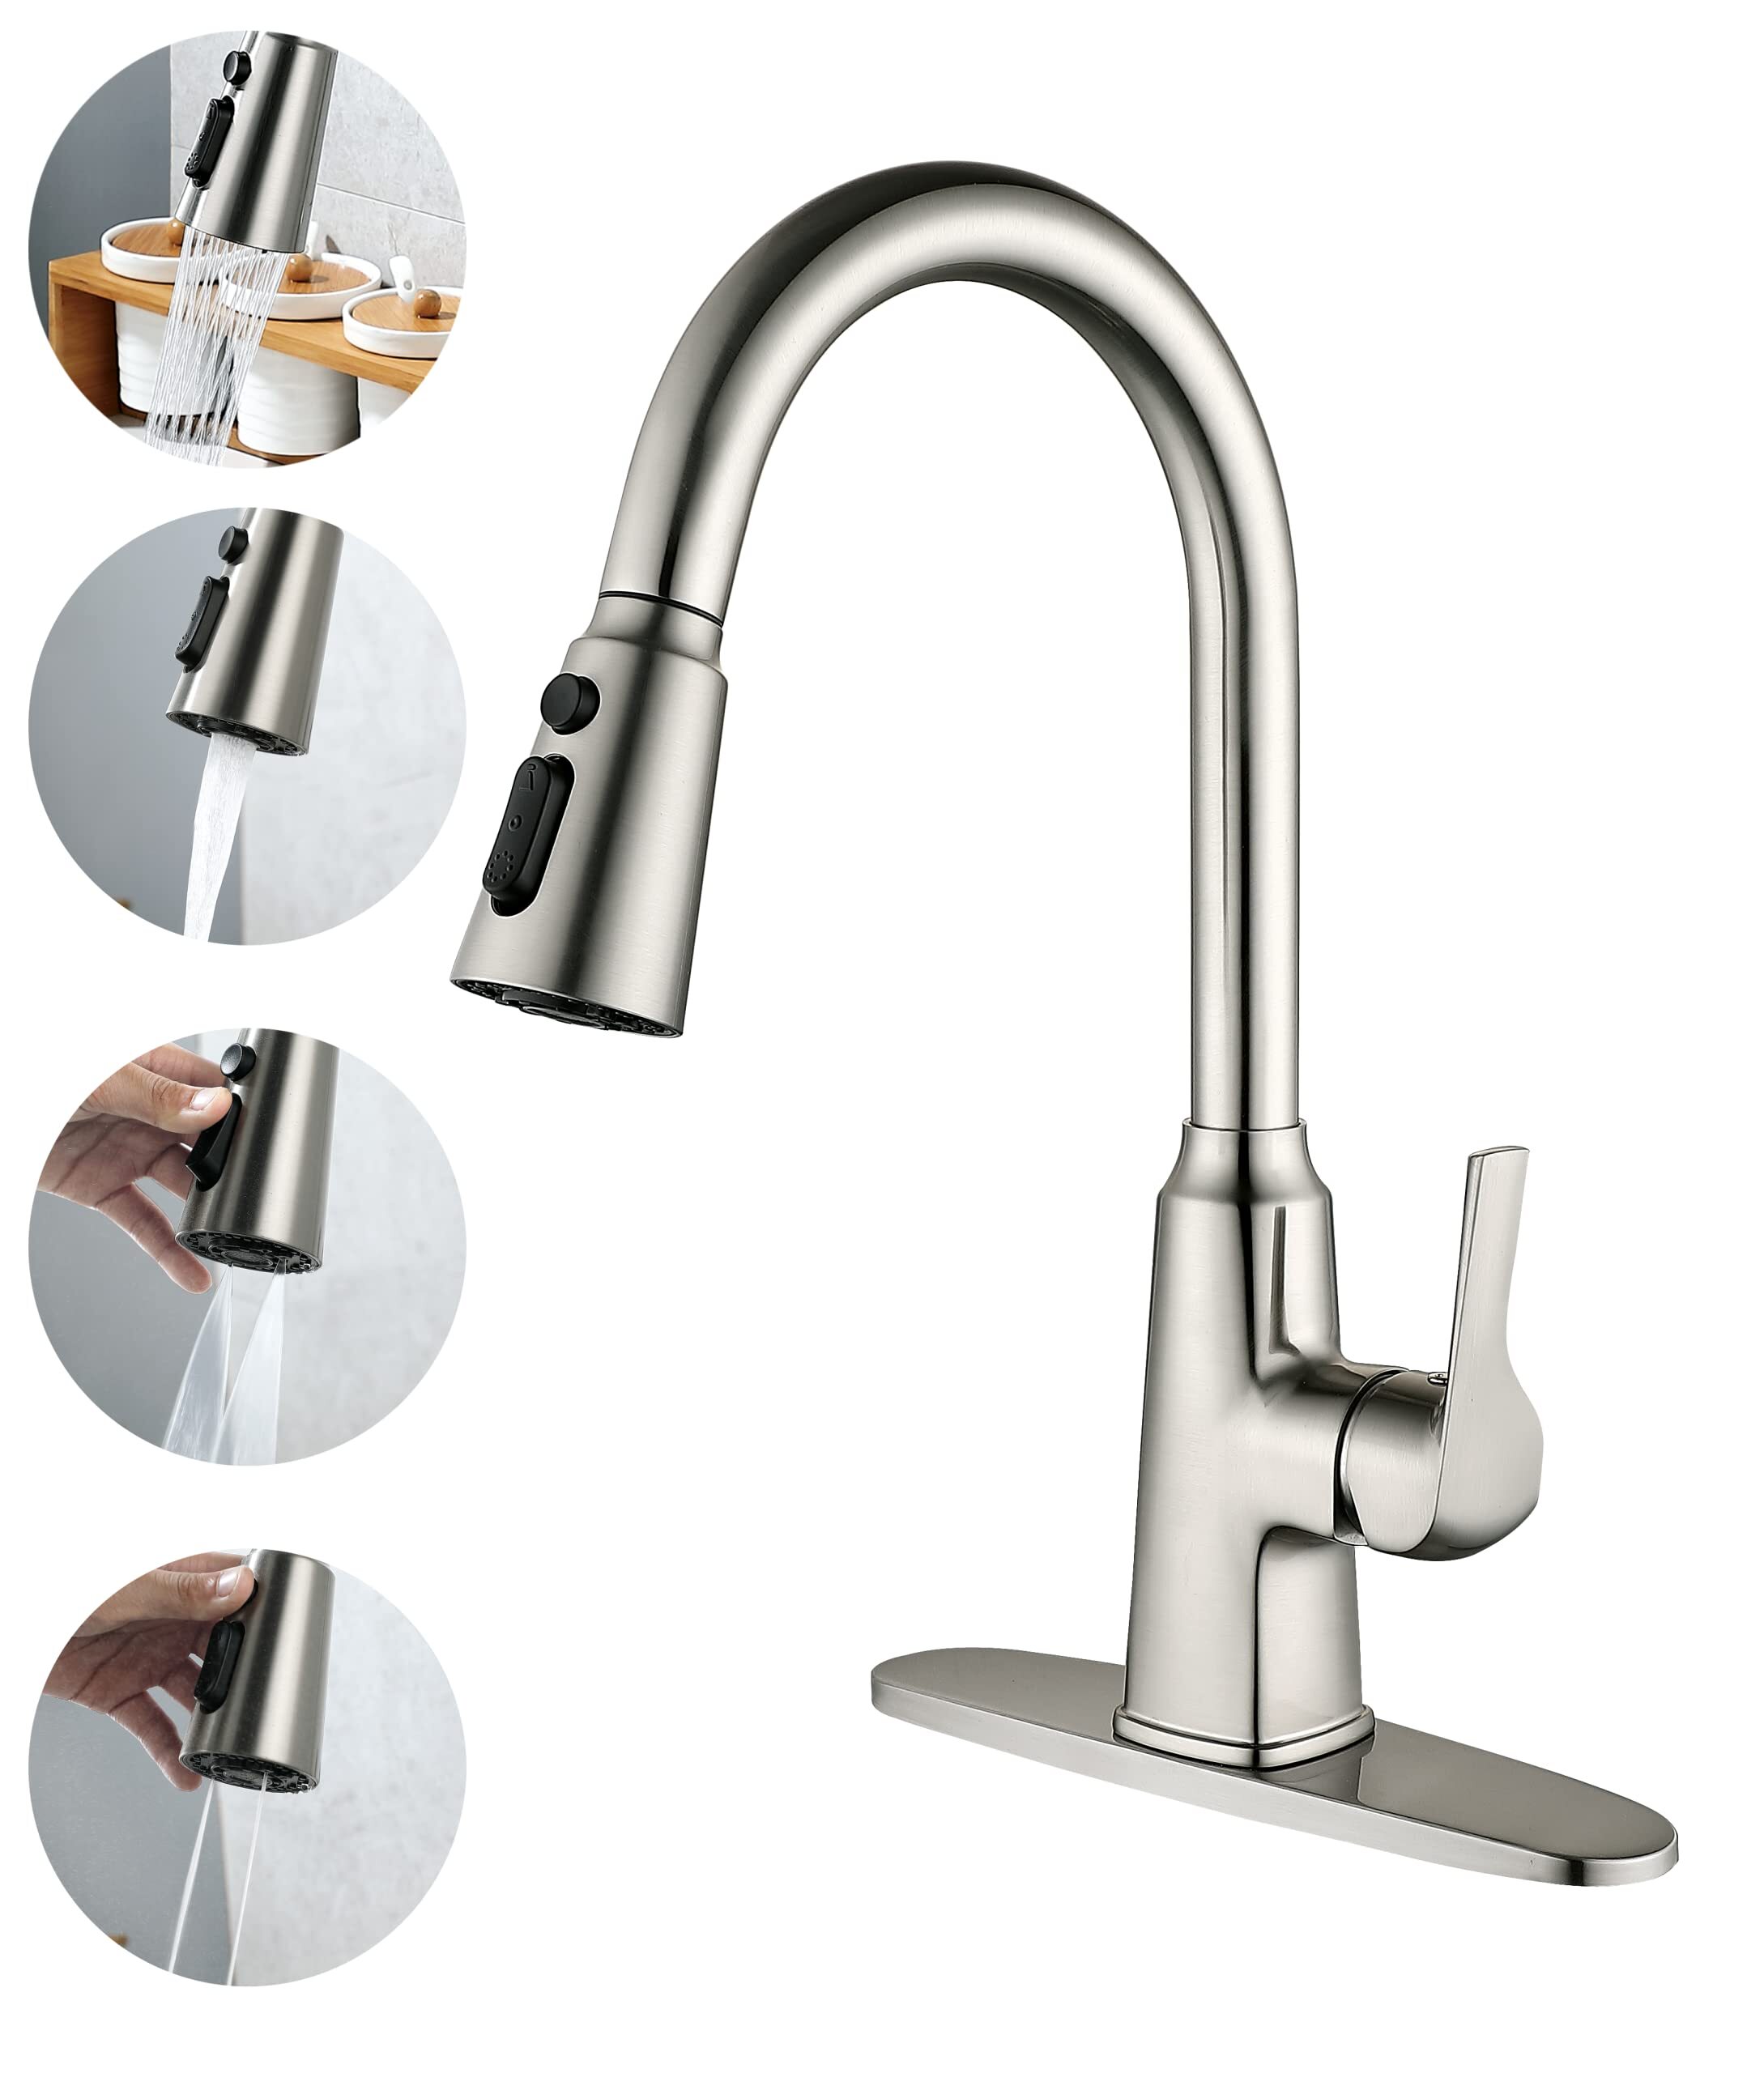 Single Handle High Arc Brushed Nickel Pull Out Kitchen Faucet, Pull Down Sprayer Kitchen Sink Faucet, Stainless Steel Fingerprint Proof Faucet, Commercial, RV, or Bar.1 or 3 Hole